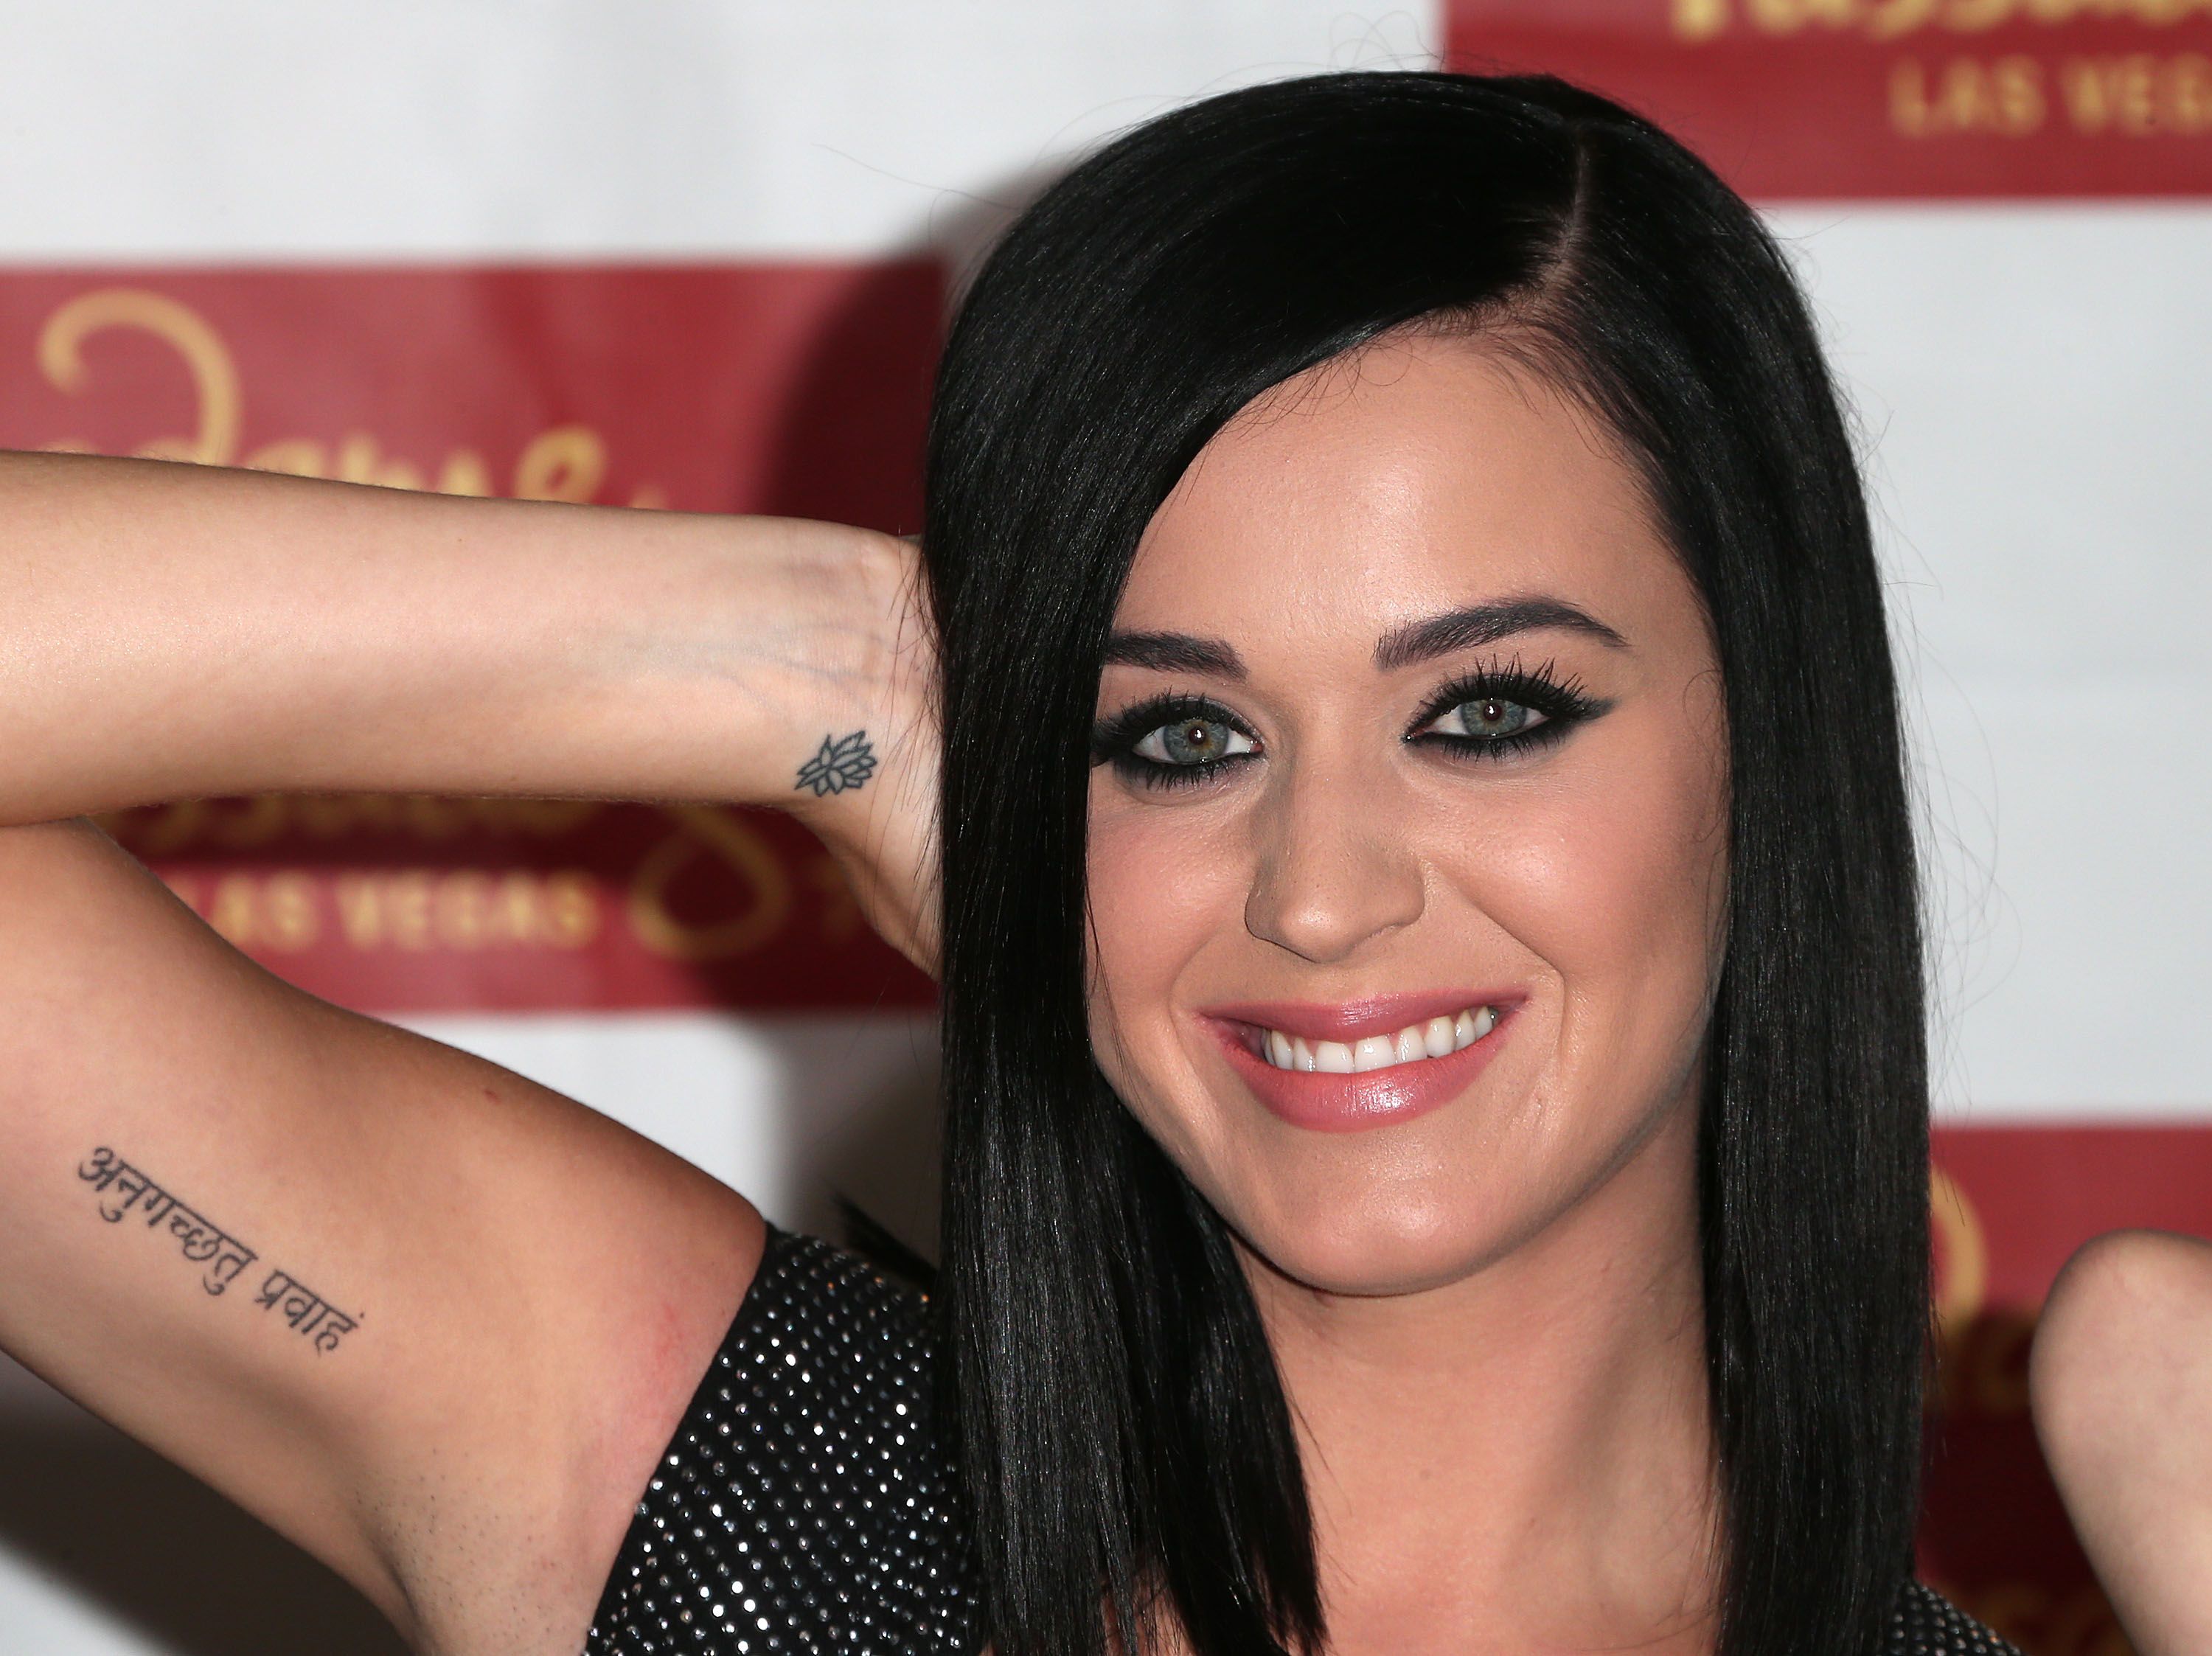 Katy Perry Unveils Her Wax Figure For Madame Tussauds' Las Vegas at Paramont Studios on January 26, 2013 in Hollywood, California. | Source: Getty Images